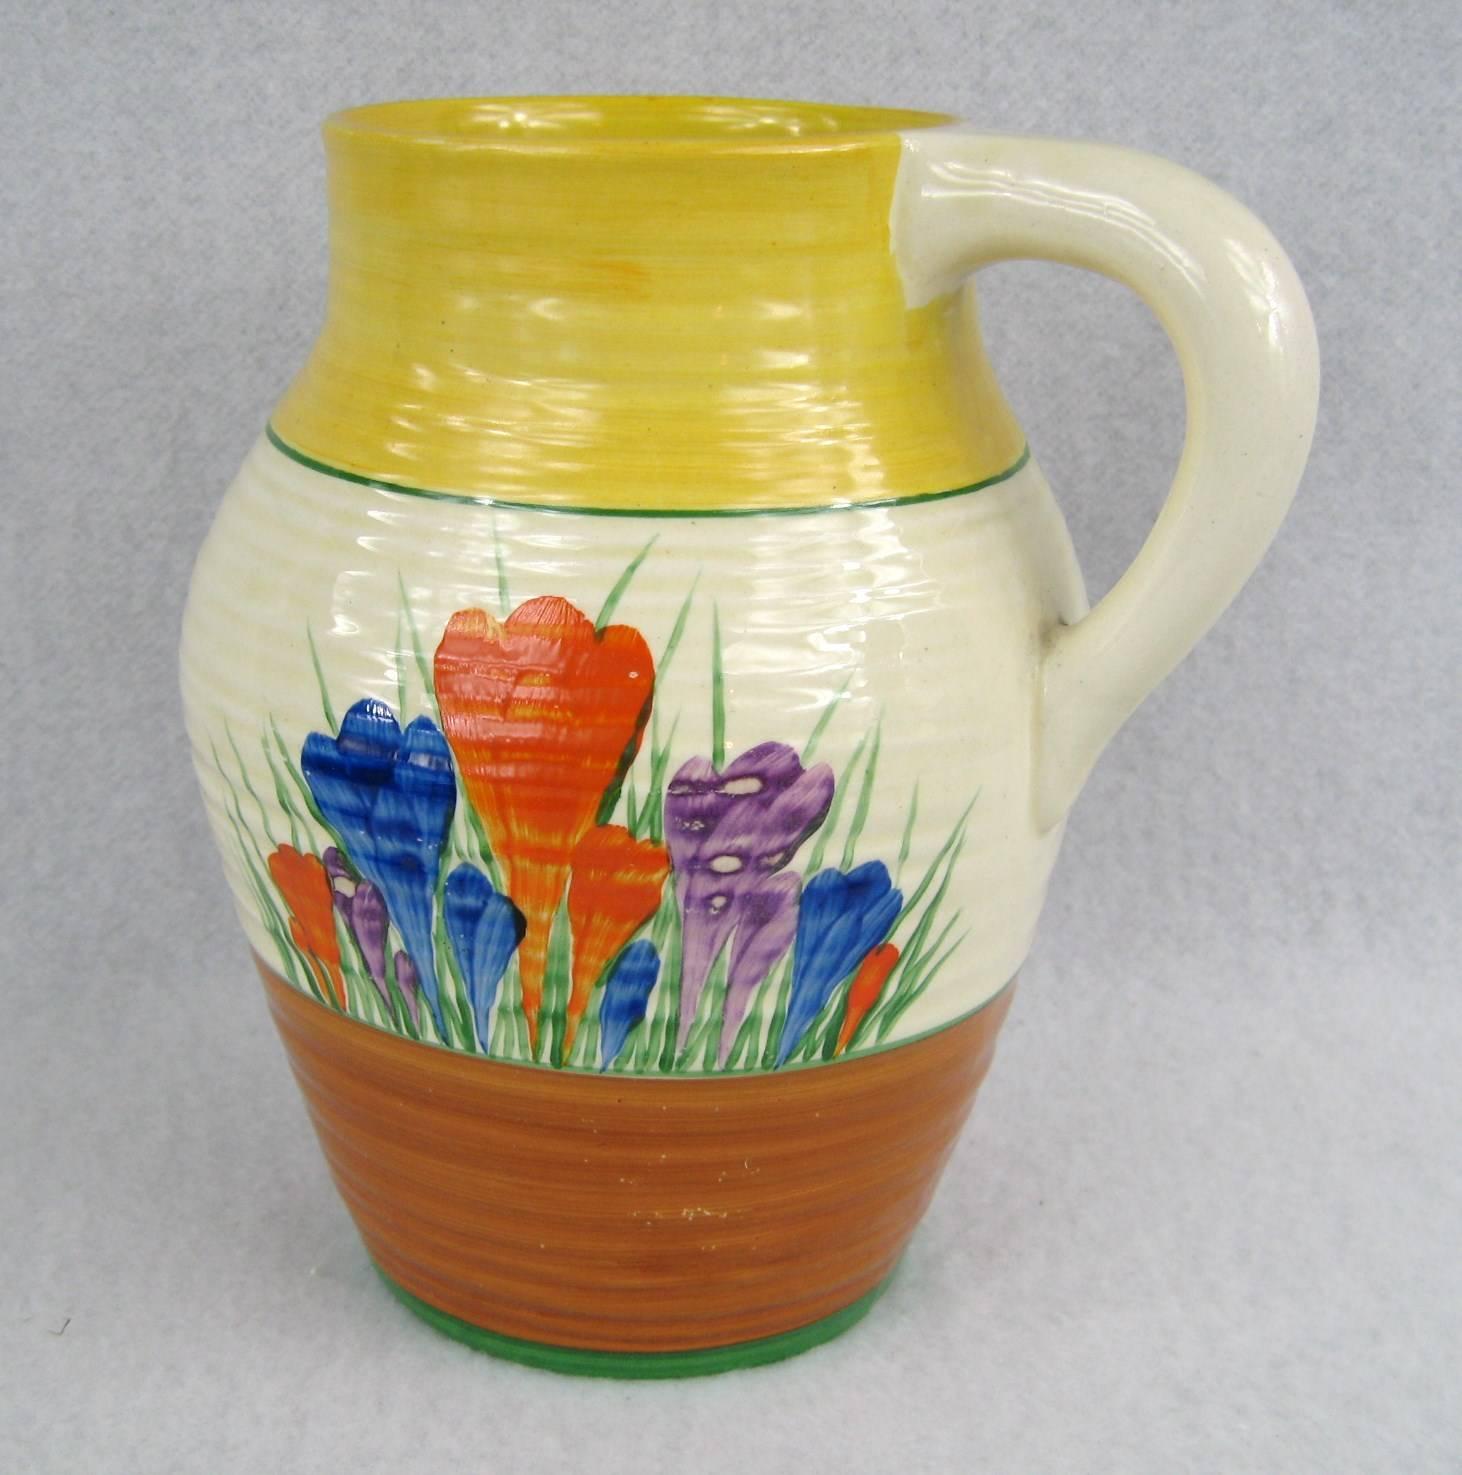 Stunning colors on this Clarice Cliff jug. Vibrant blues, reds, yellow and green. In wonderful condition. This jug will make a fabulous addition to your home. Please check our storefront for more decor from early primitive, rustic, Americana,